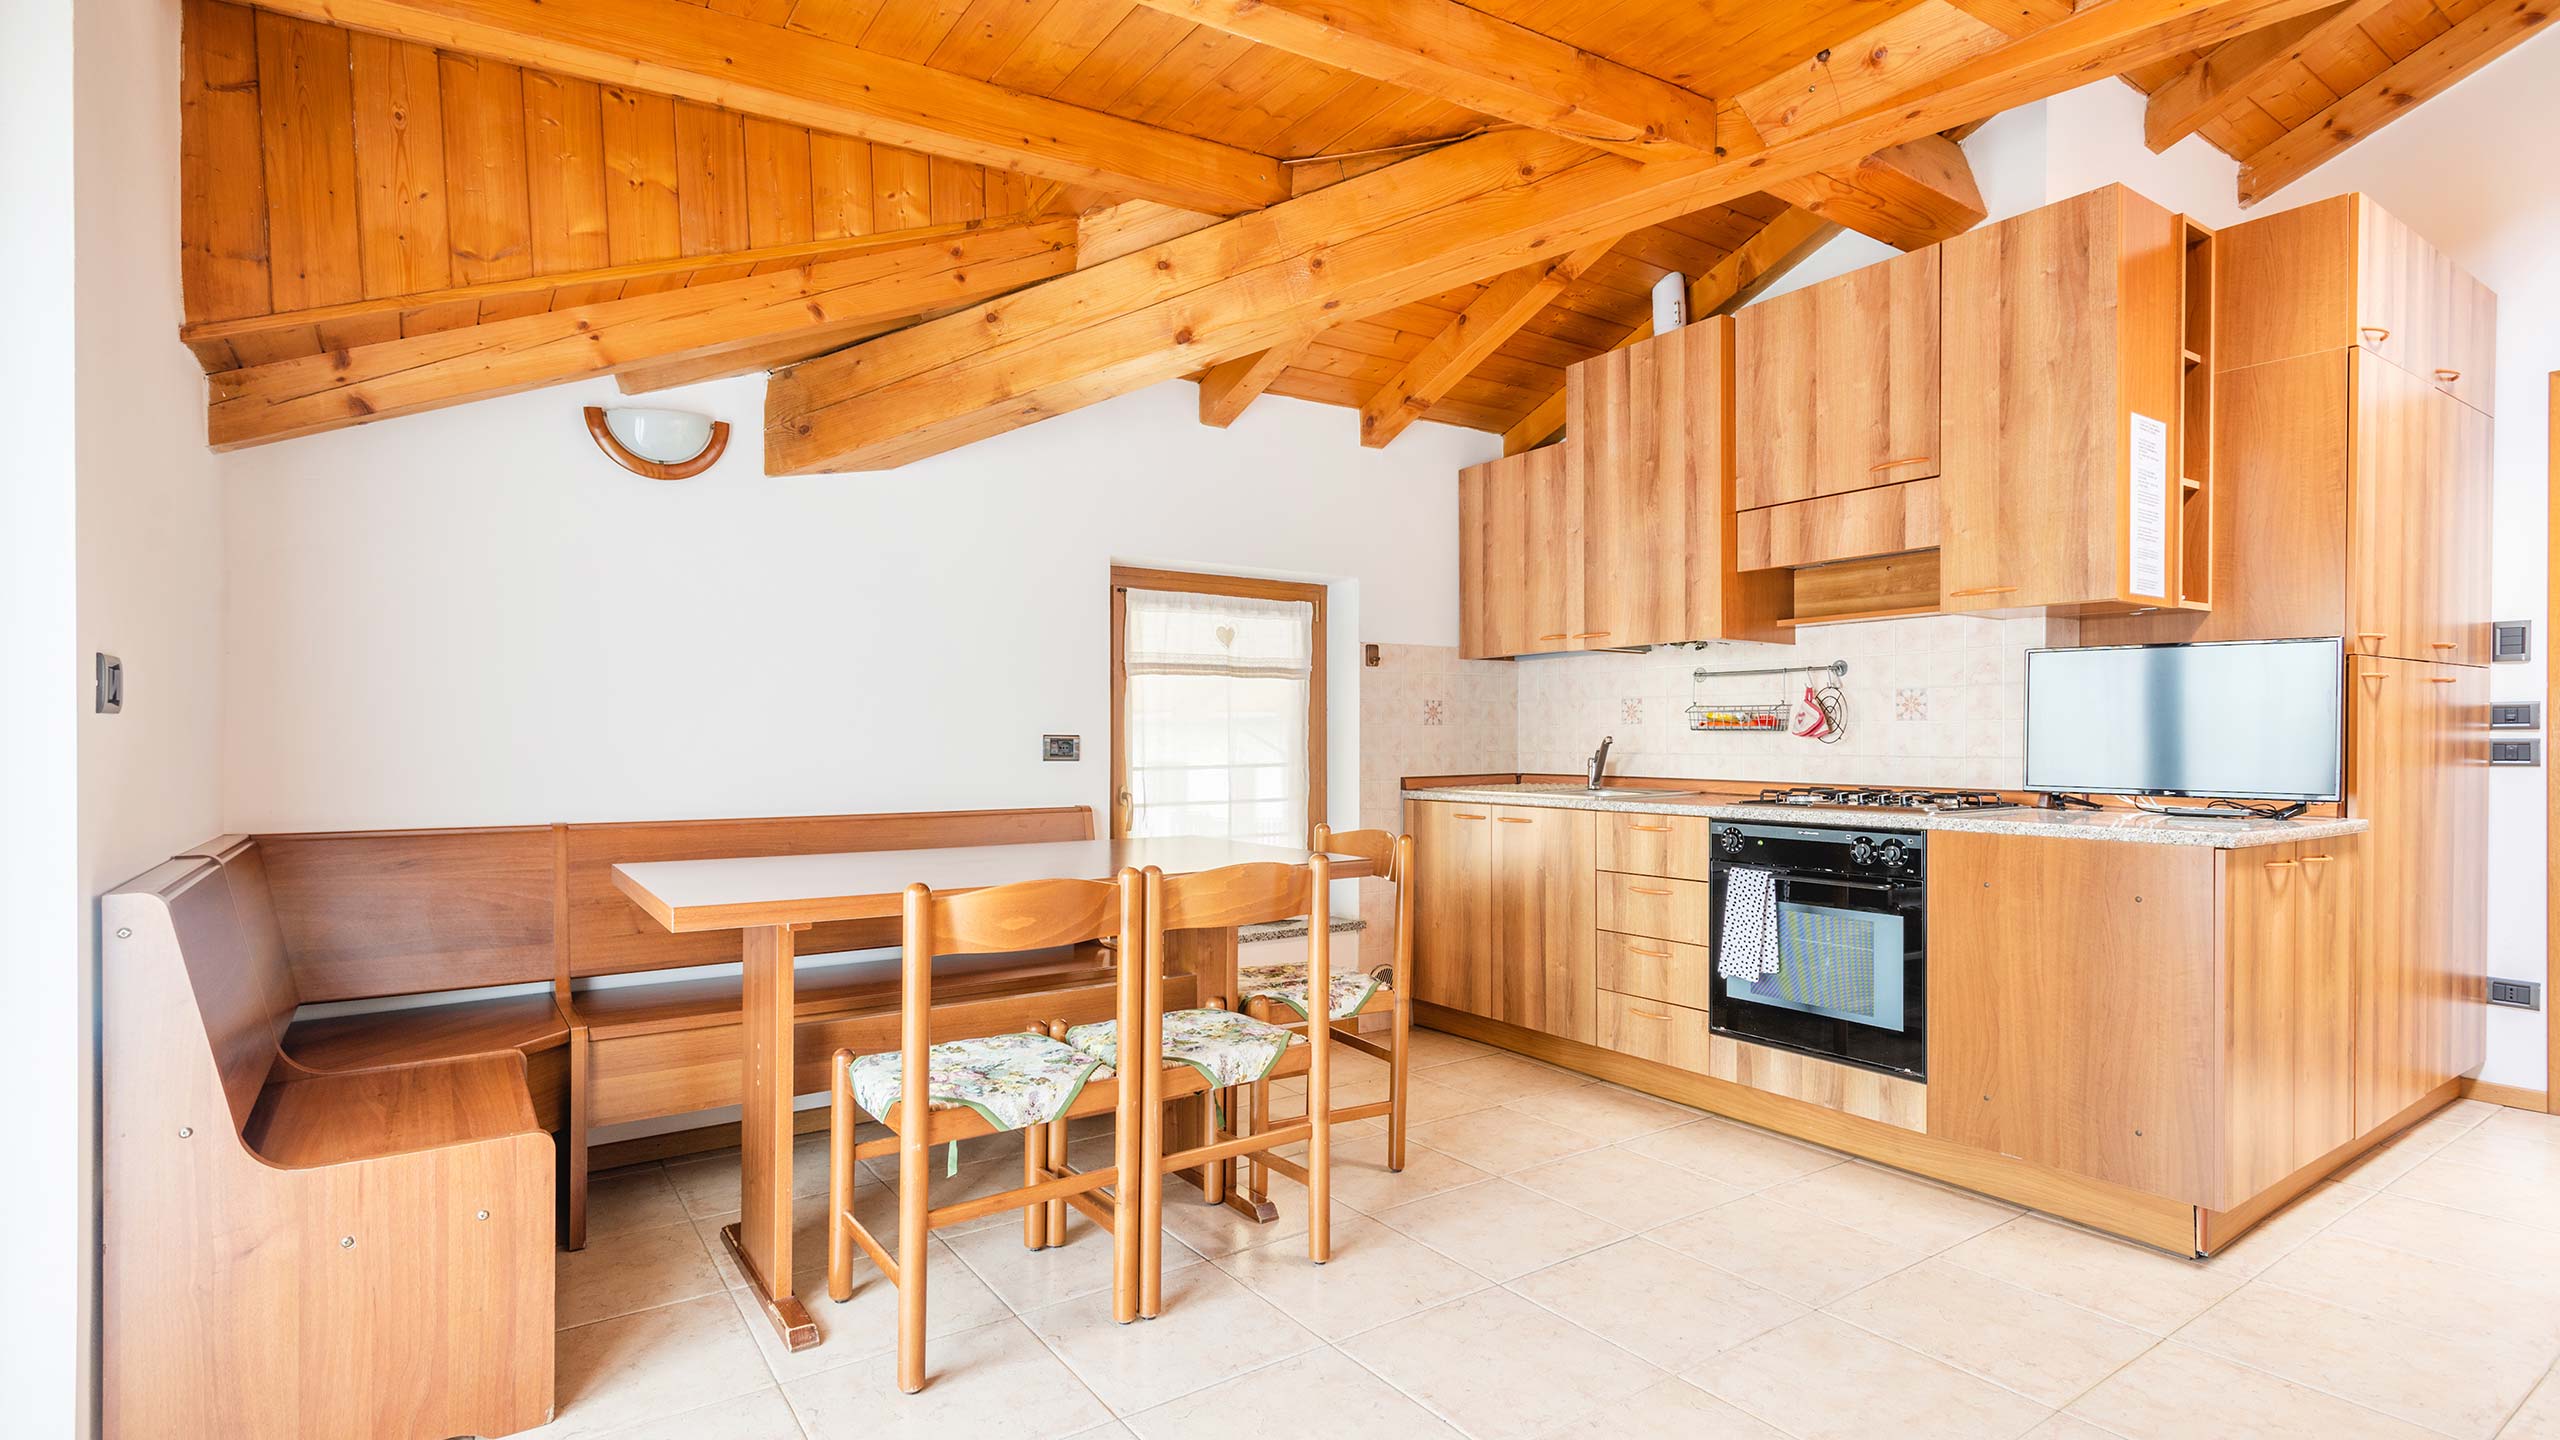 Crosina Holiday - apartment near Lake Ledro in Trentino for a family or family holiday Welcome to Casa Lucia